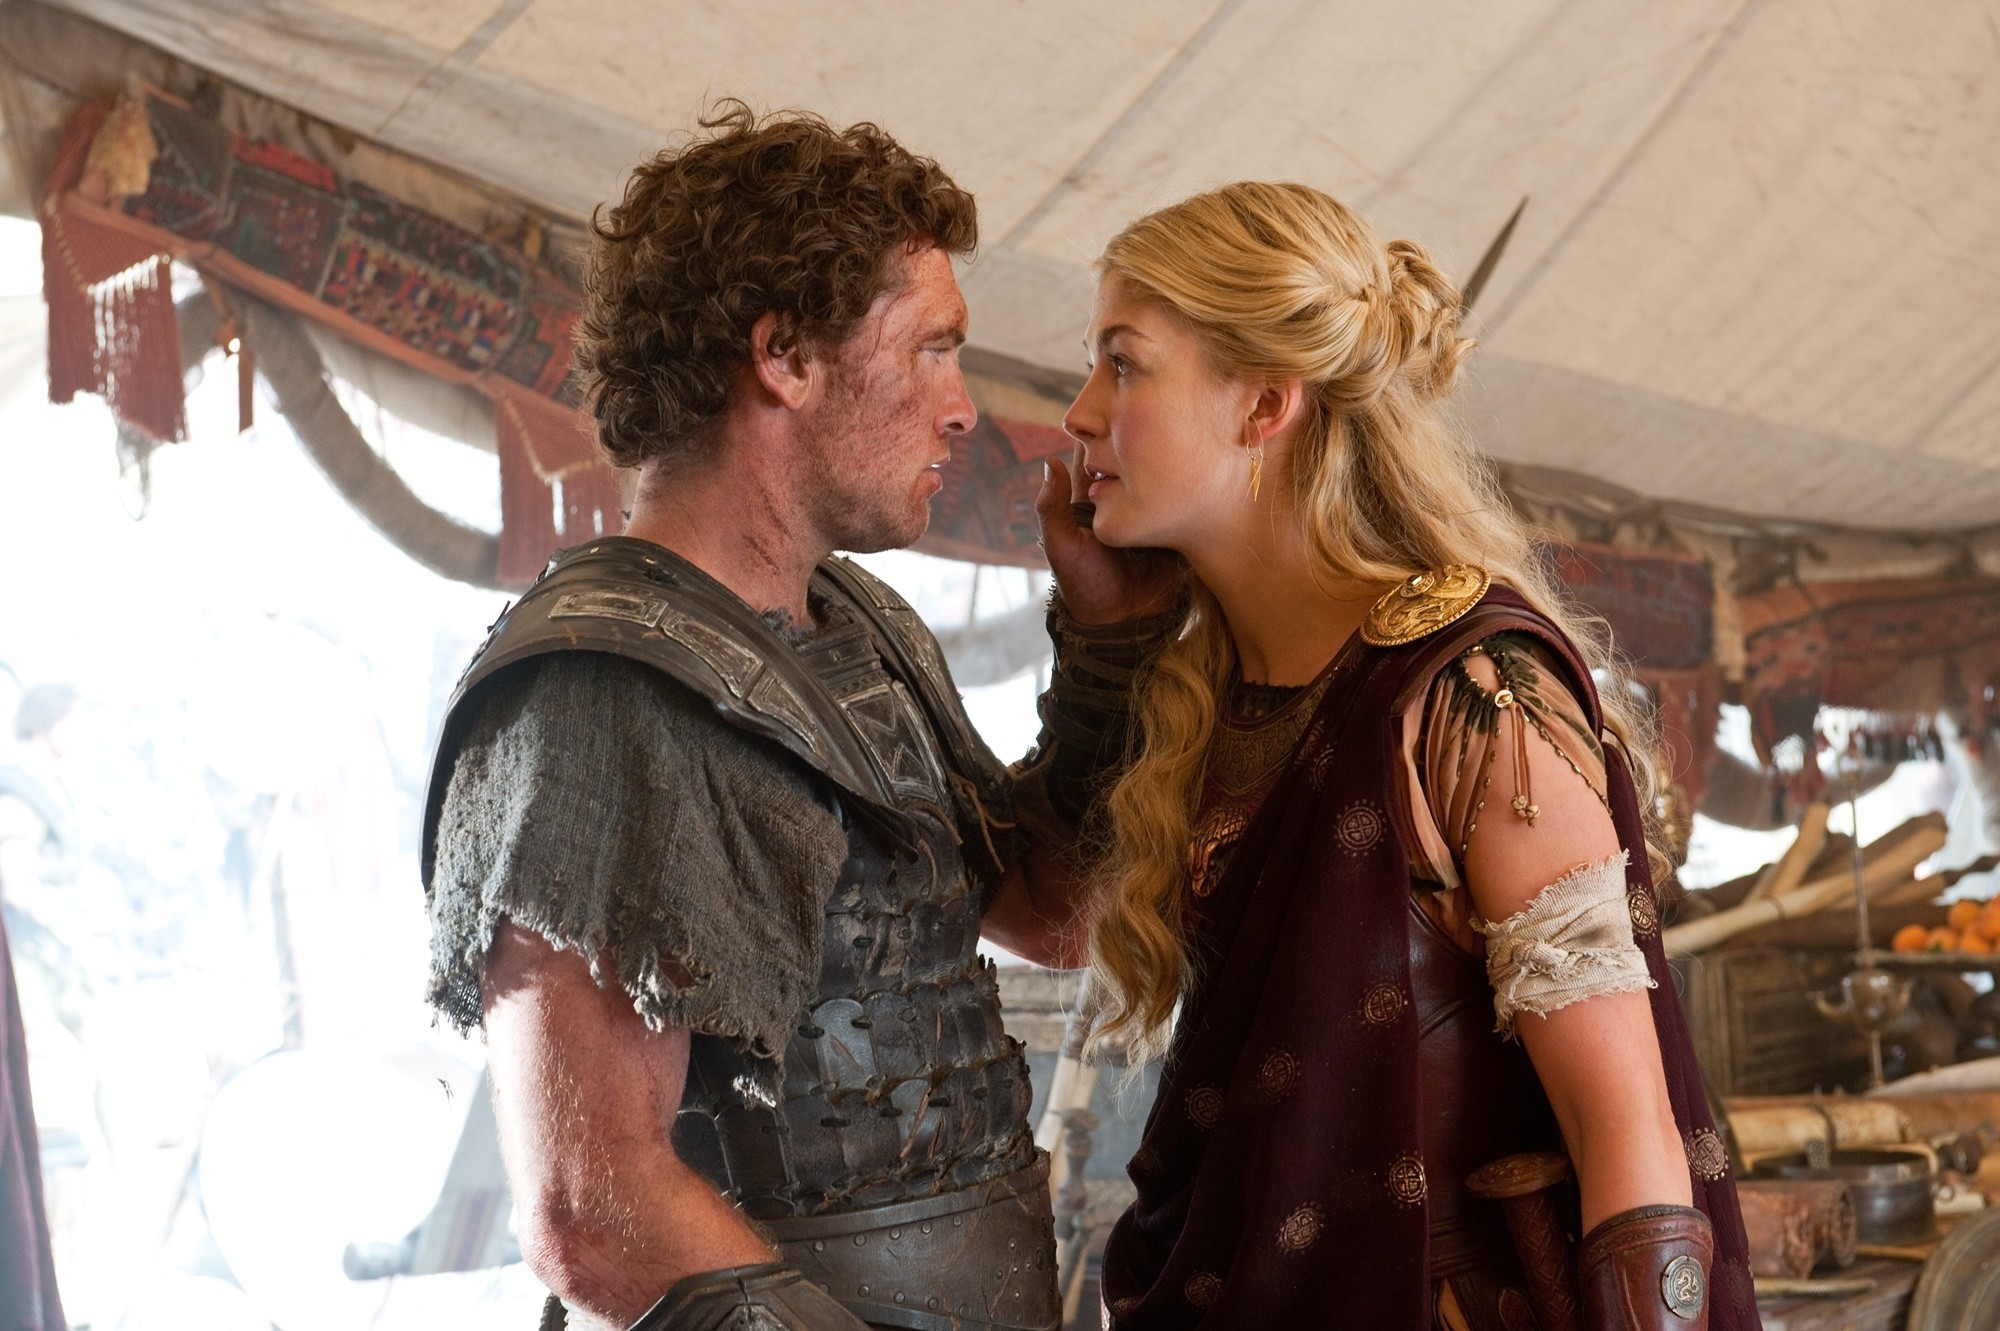 Sam Worthington stars as Perseus and Rosamund Pike stars as Andromeda in Warner Bros. Pictures' Wrath of the Titans (2012). Photo credit by Jay Maidment.